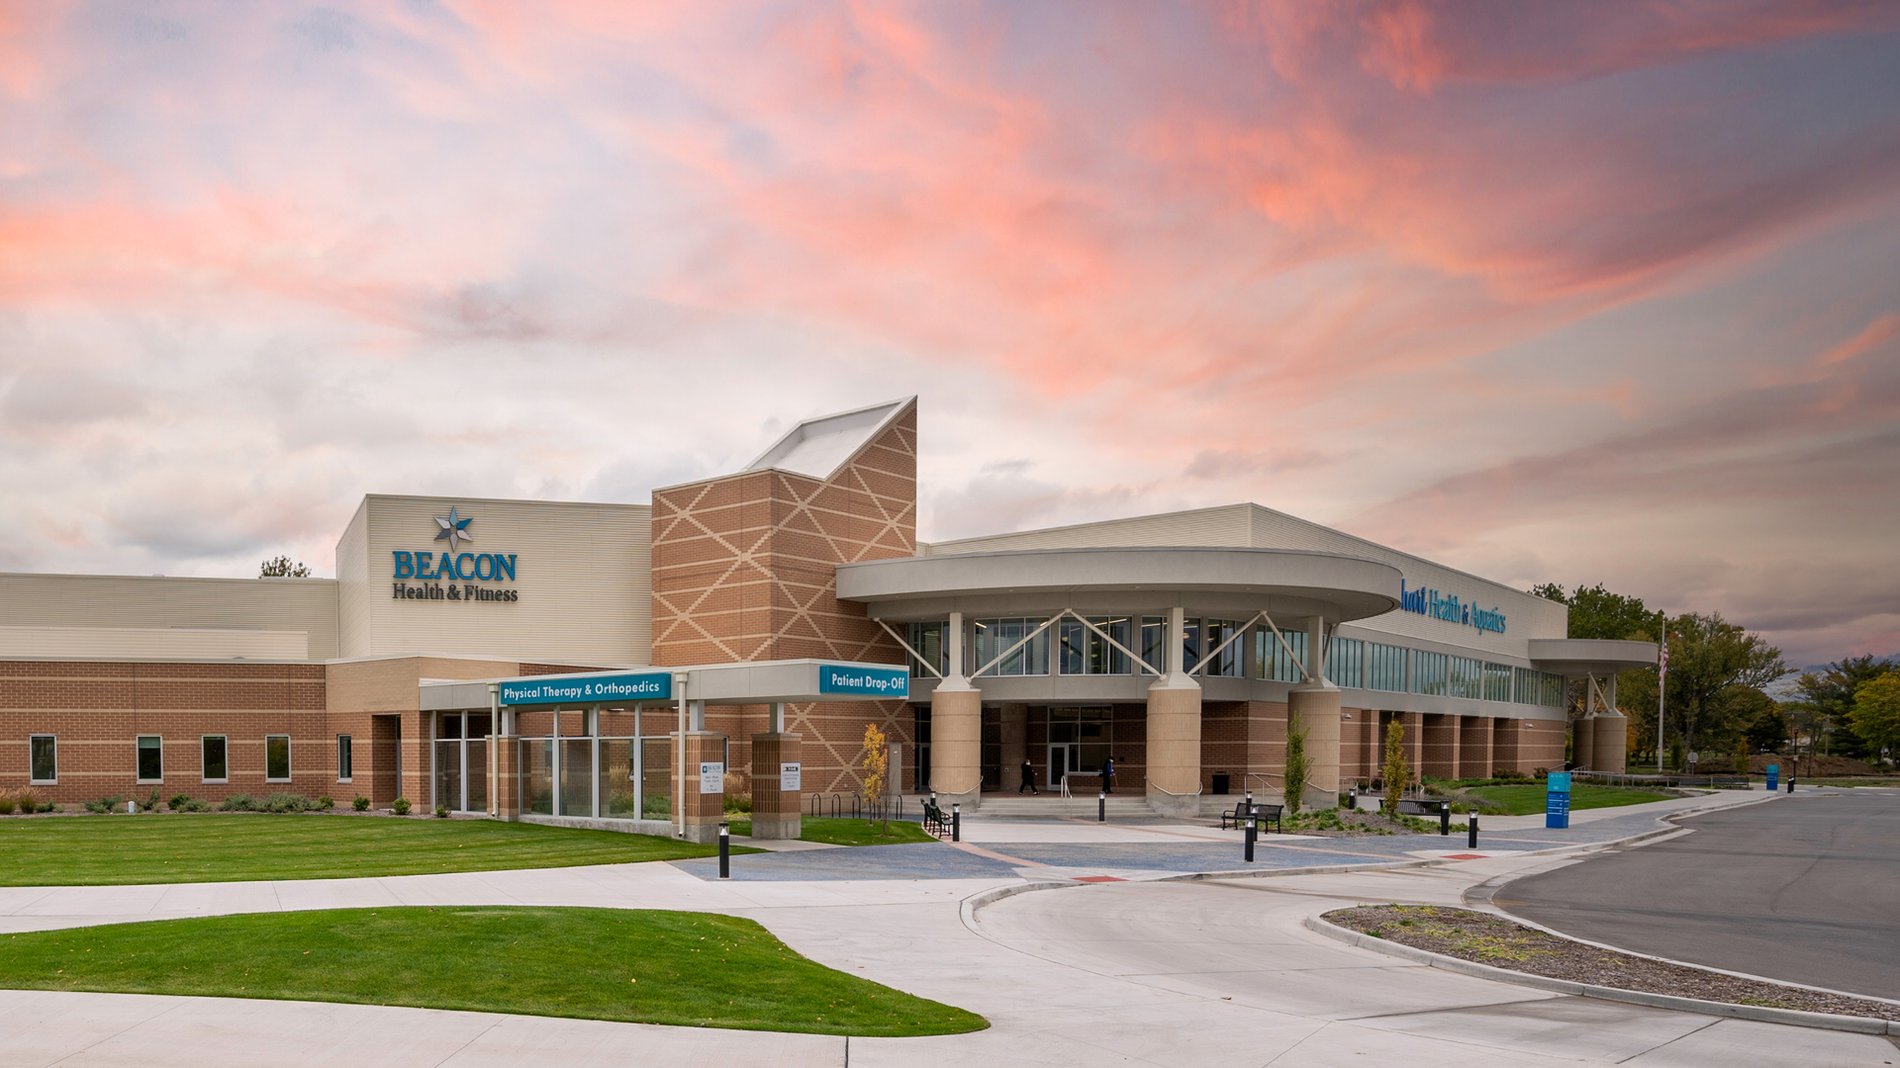 The modern, tan building of Beacon Health & Fitness in Elkhart. It has signage that indicates areas for aquatics, patient drop-off, and physical therapy and orthopedics.